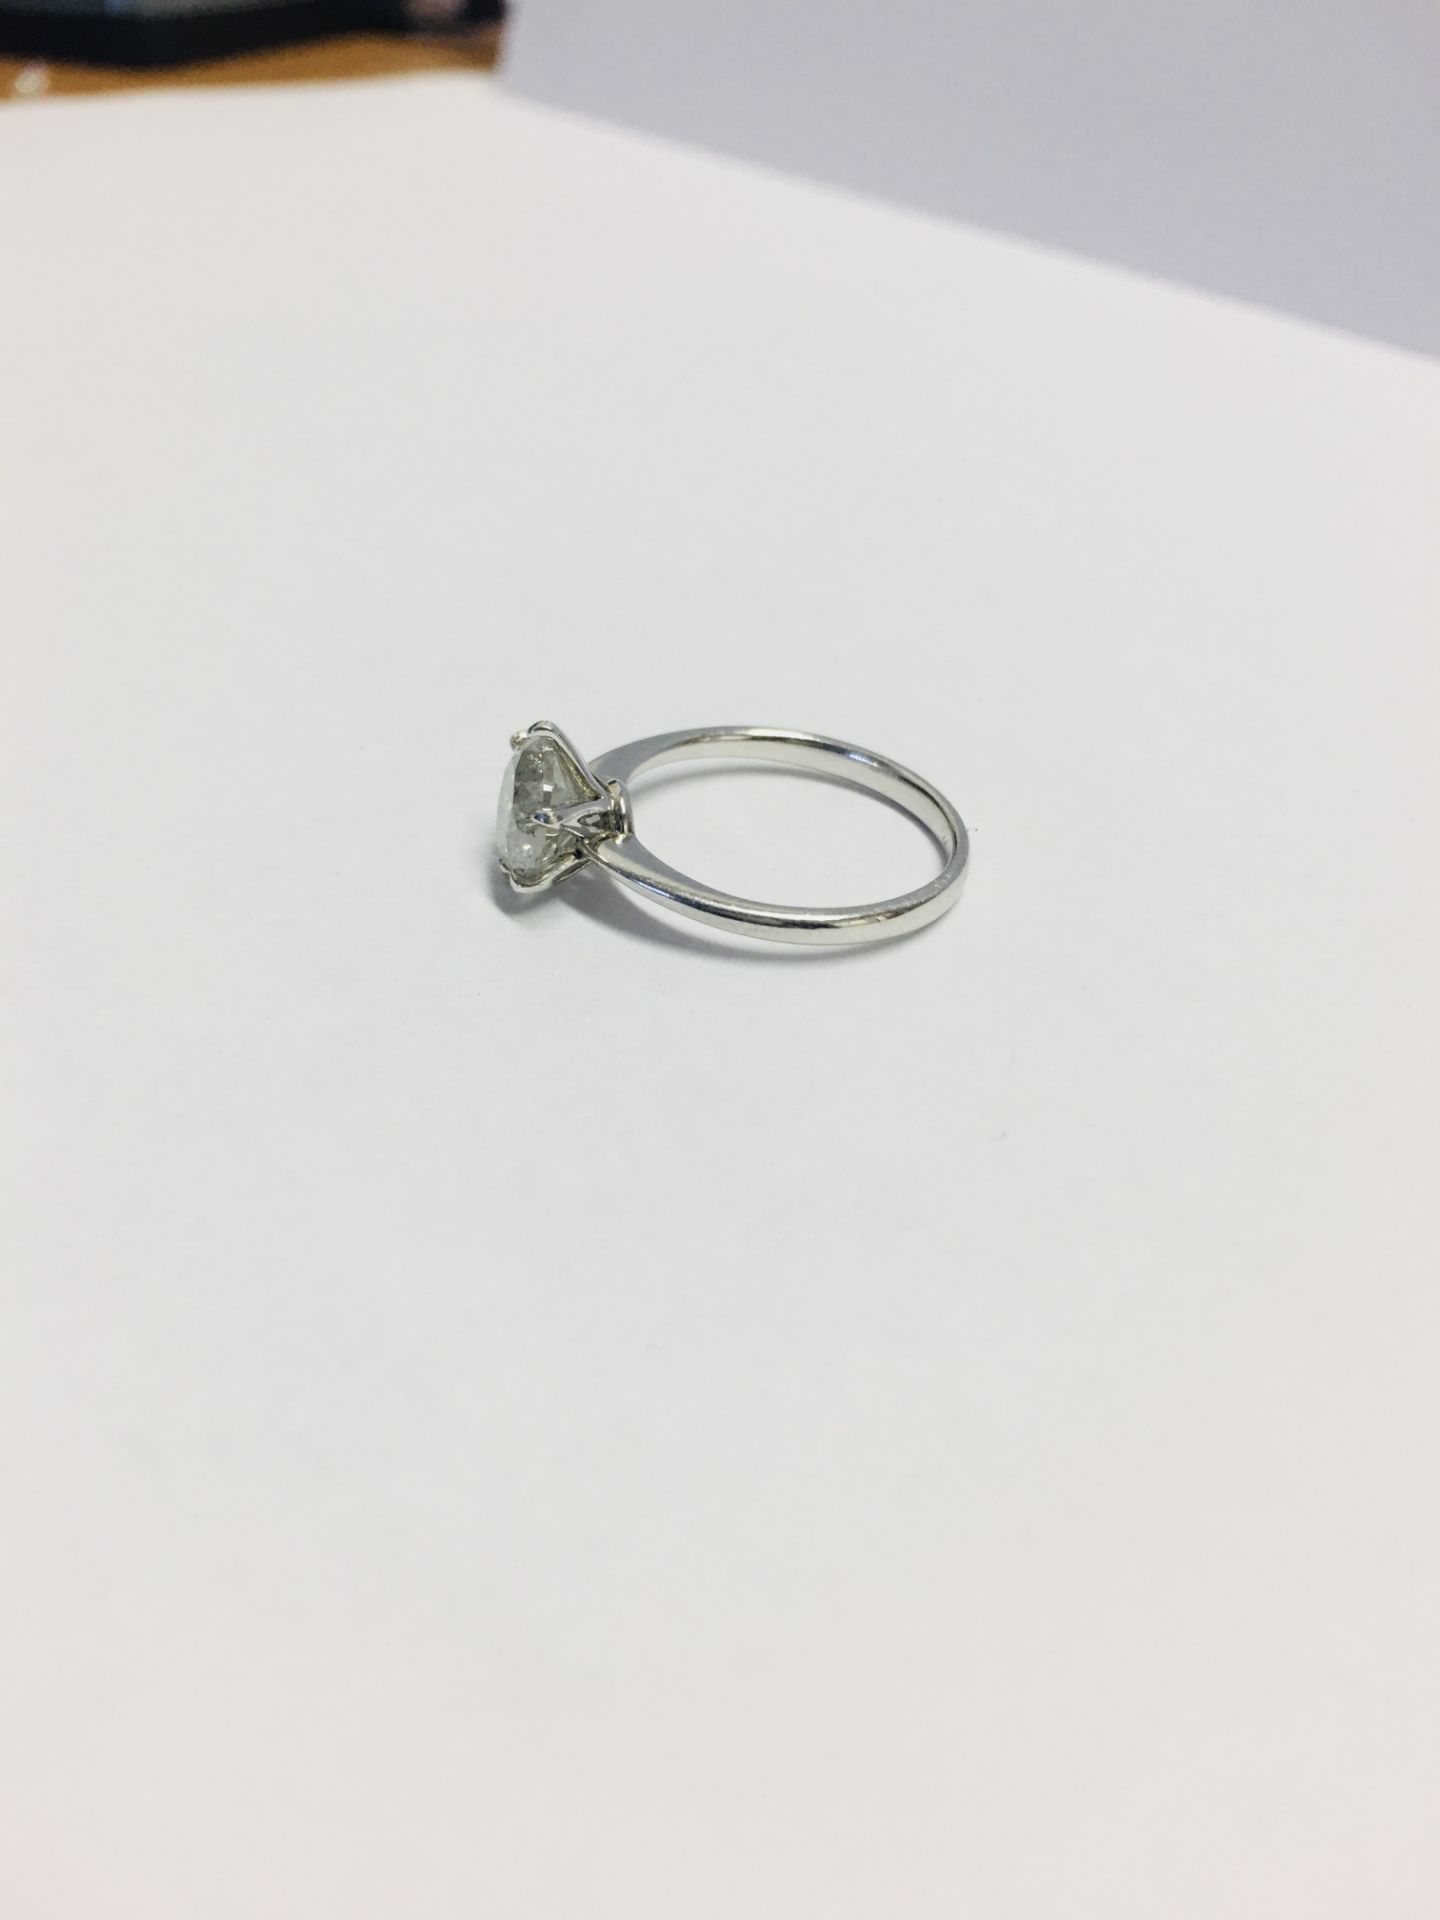 Diamond Solitaire Ring, - Image 2 of 6